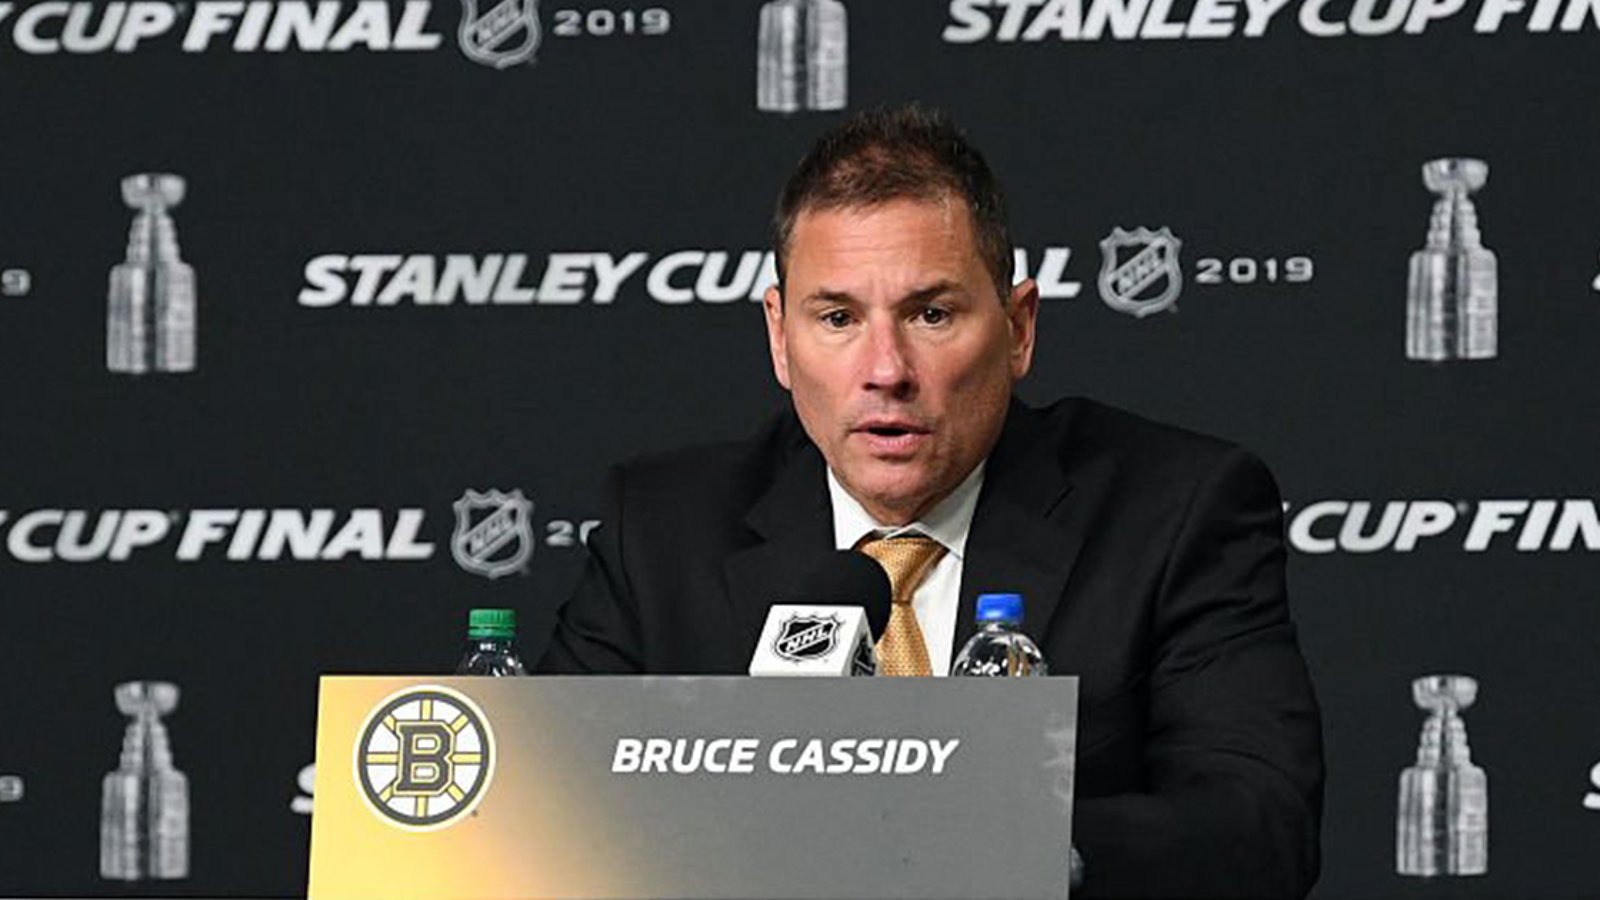 Cassidy defends Rask, tells off fans who blame his goalie